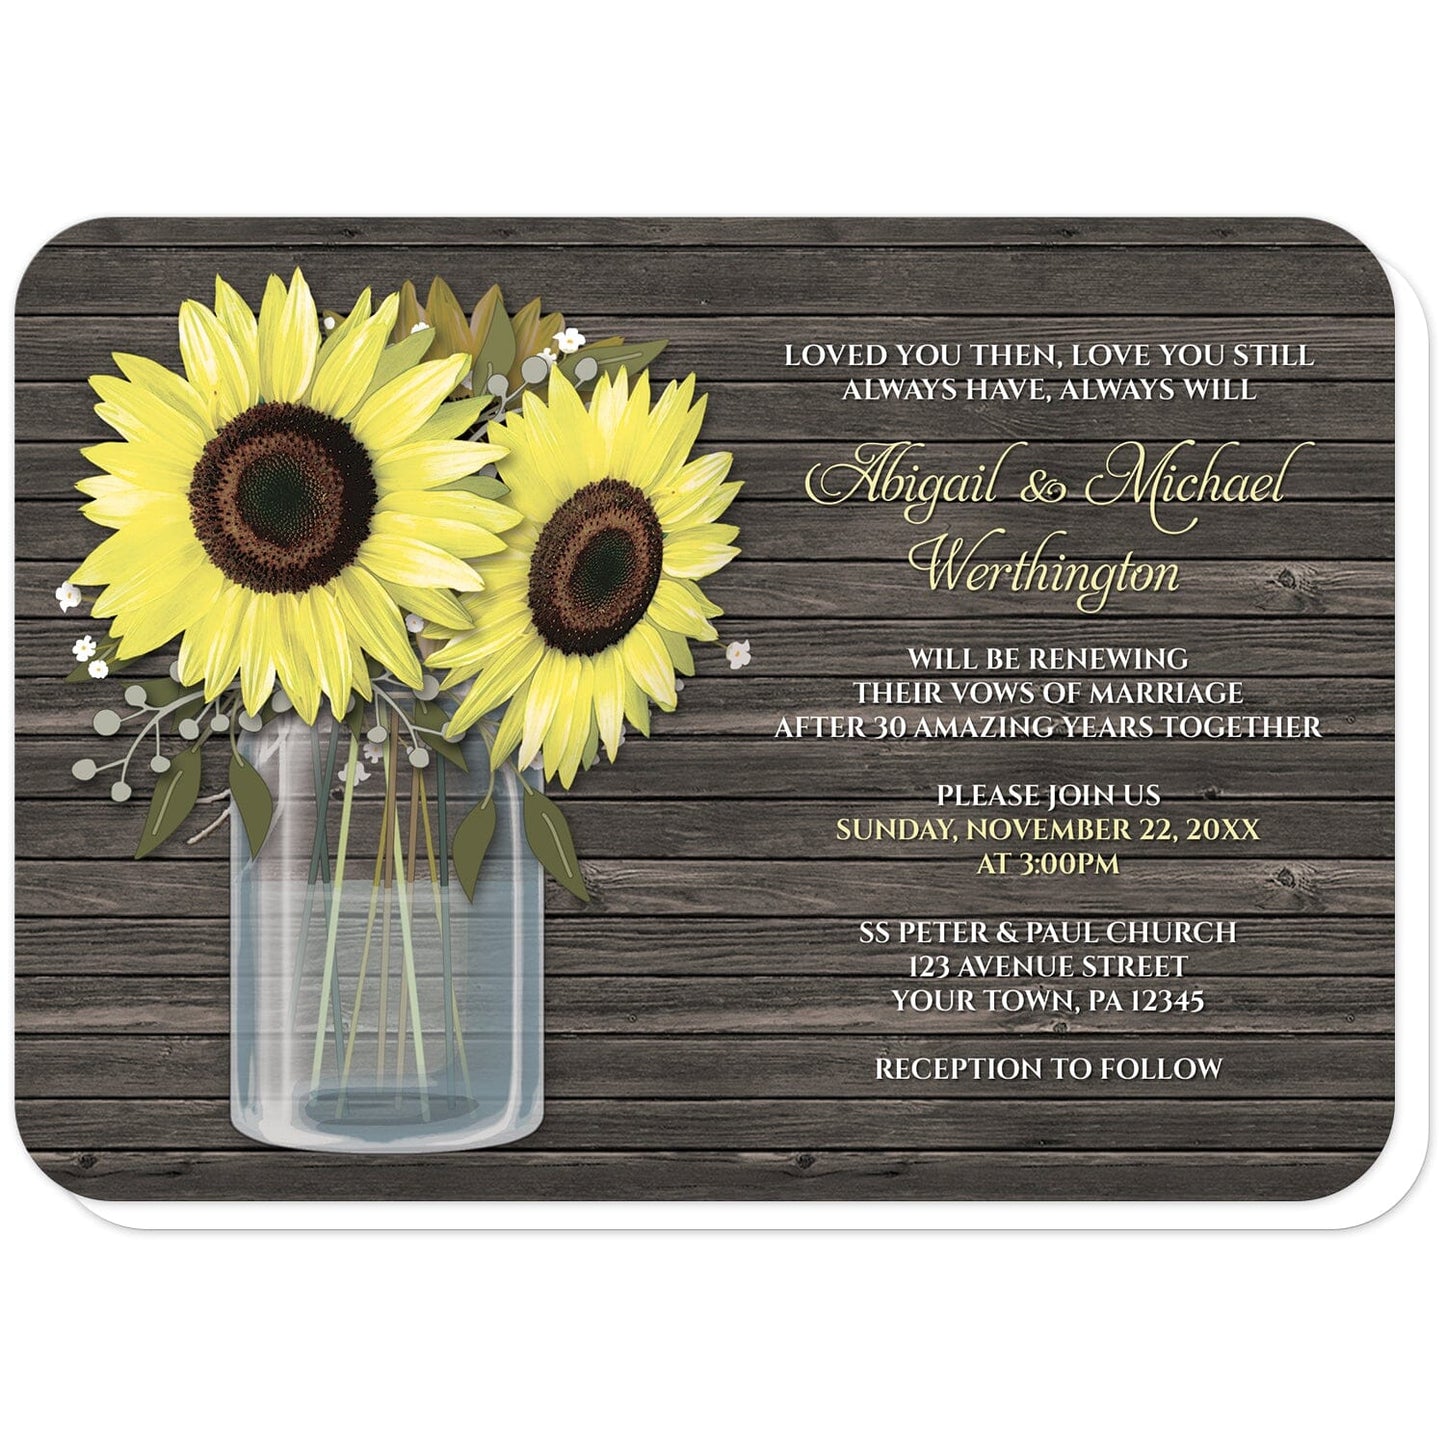 Rustic Sunflower Wood Mason Jar Vow Renewal Invitations (with rounded corners) at Artistically Invited. Southern country-inspired rustic sunflower wood mason jar vow renewal invitations with big yellow sunflowers, small accents of baby's breath, and green leaves in a glass mason jar illustration. Your personalized vow renewal details are custom printed in yellow and white to the right of the sunflowers and mason jar design over a dark brown wood background.